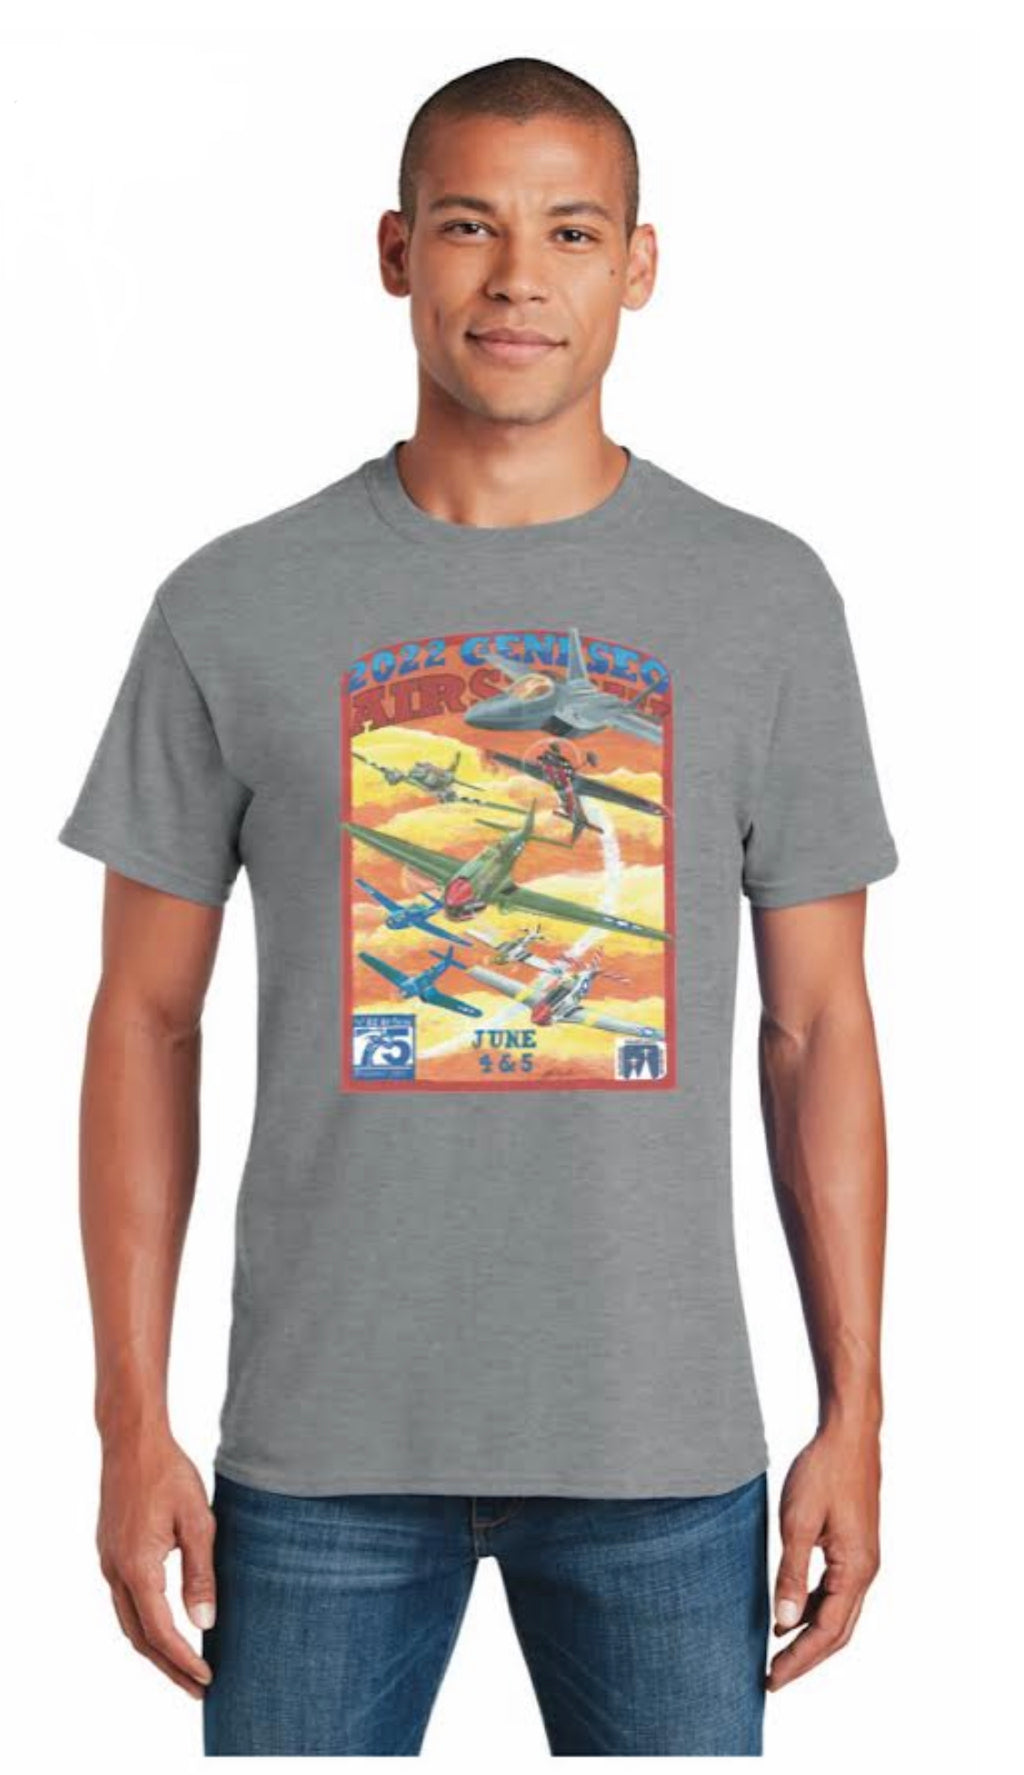 Official 2022 Geneseo Airshow Tee Shirt